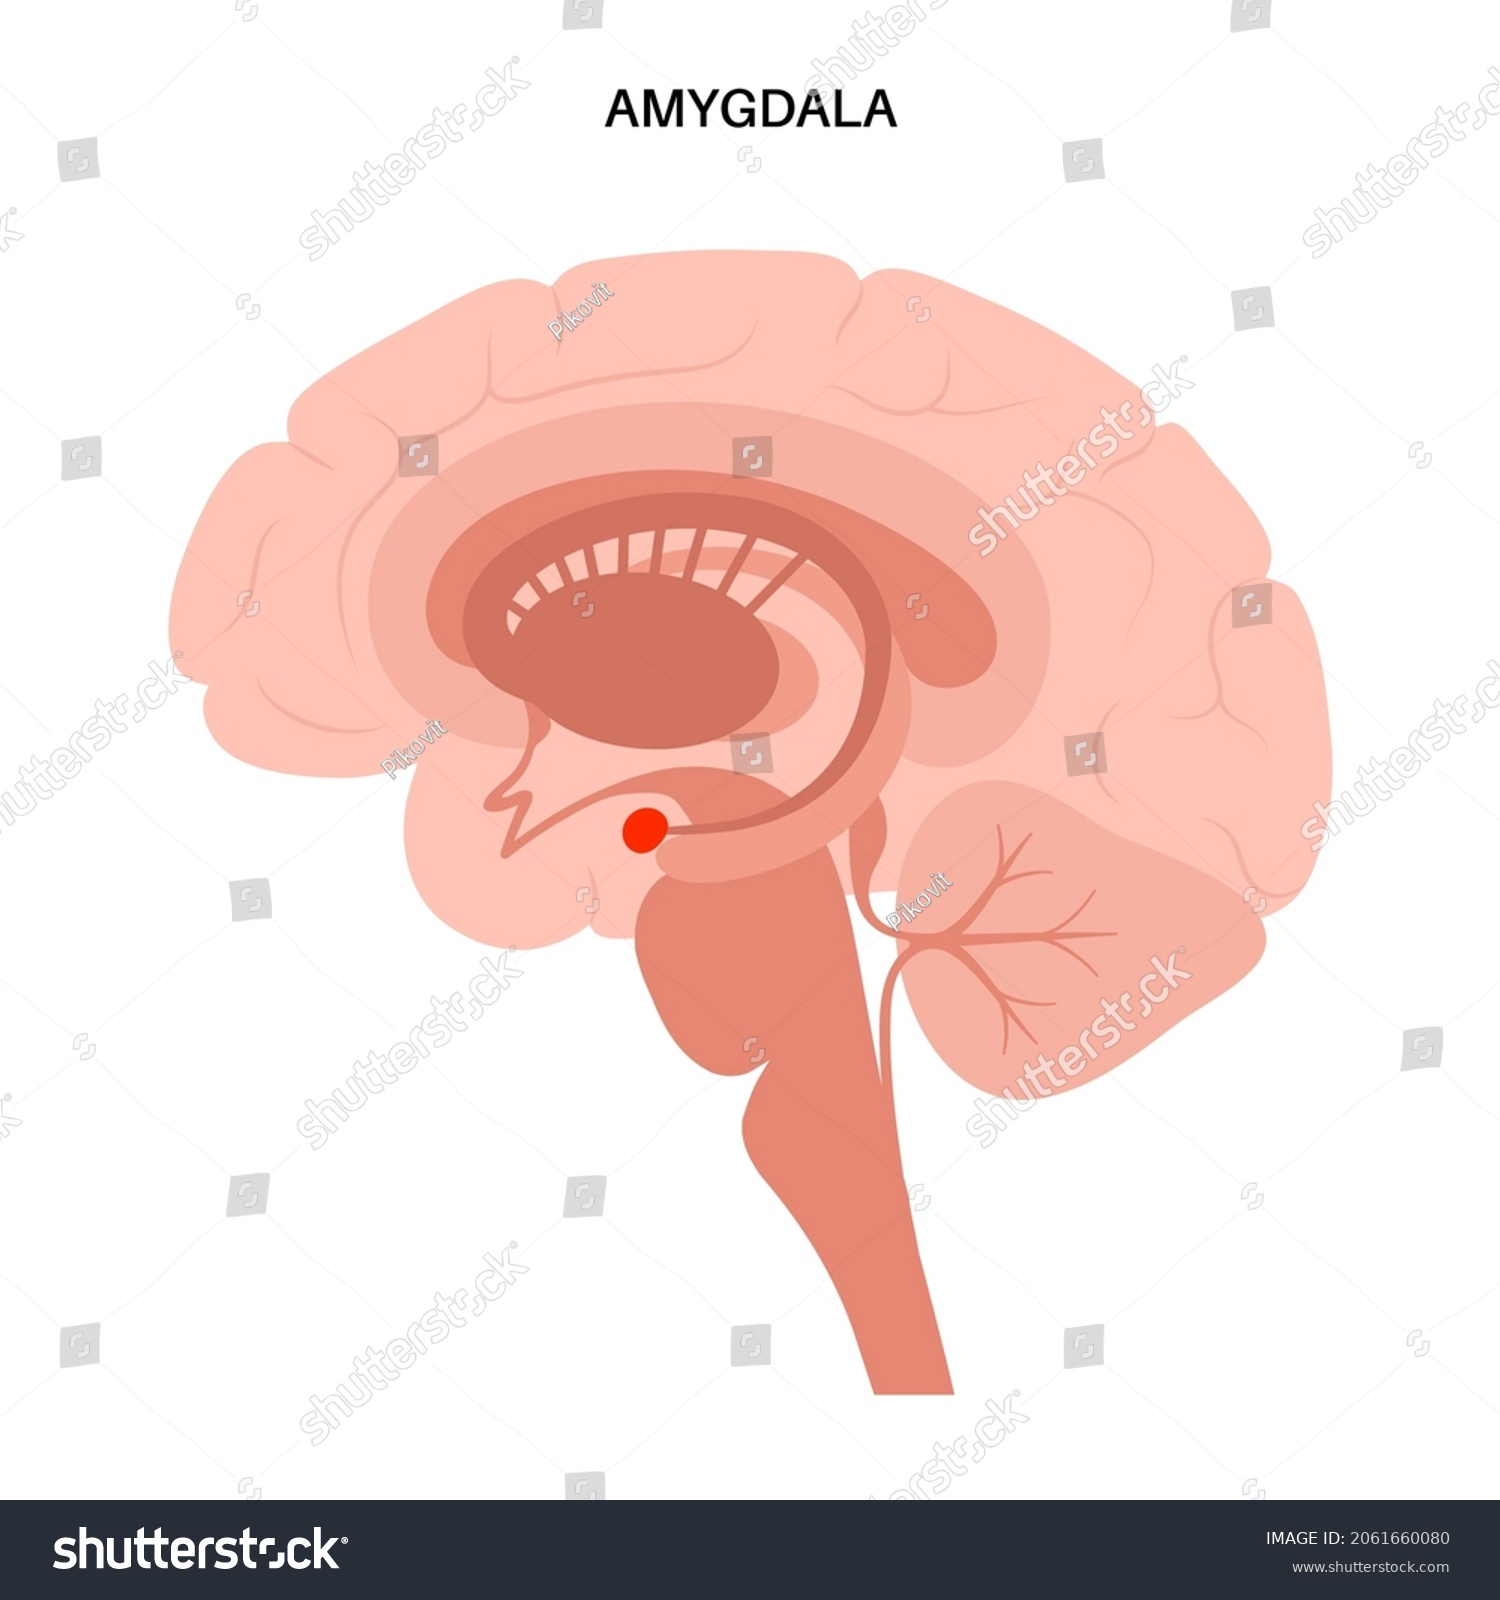 SVG of Amygdala and limbic system concept. Human brain anatomy. Cerebral cortex and cerebrum medical poster flat vector illustration for clinic or education. svg